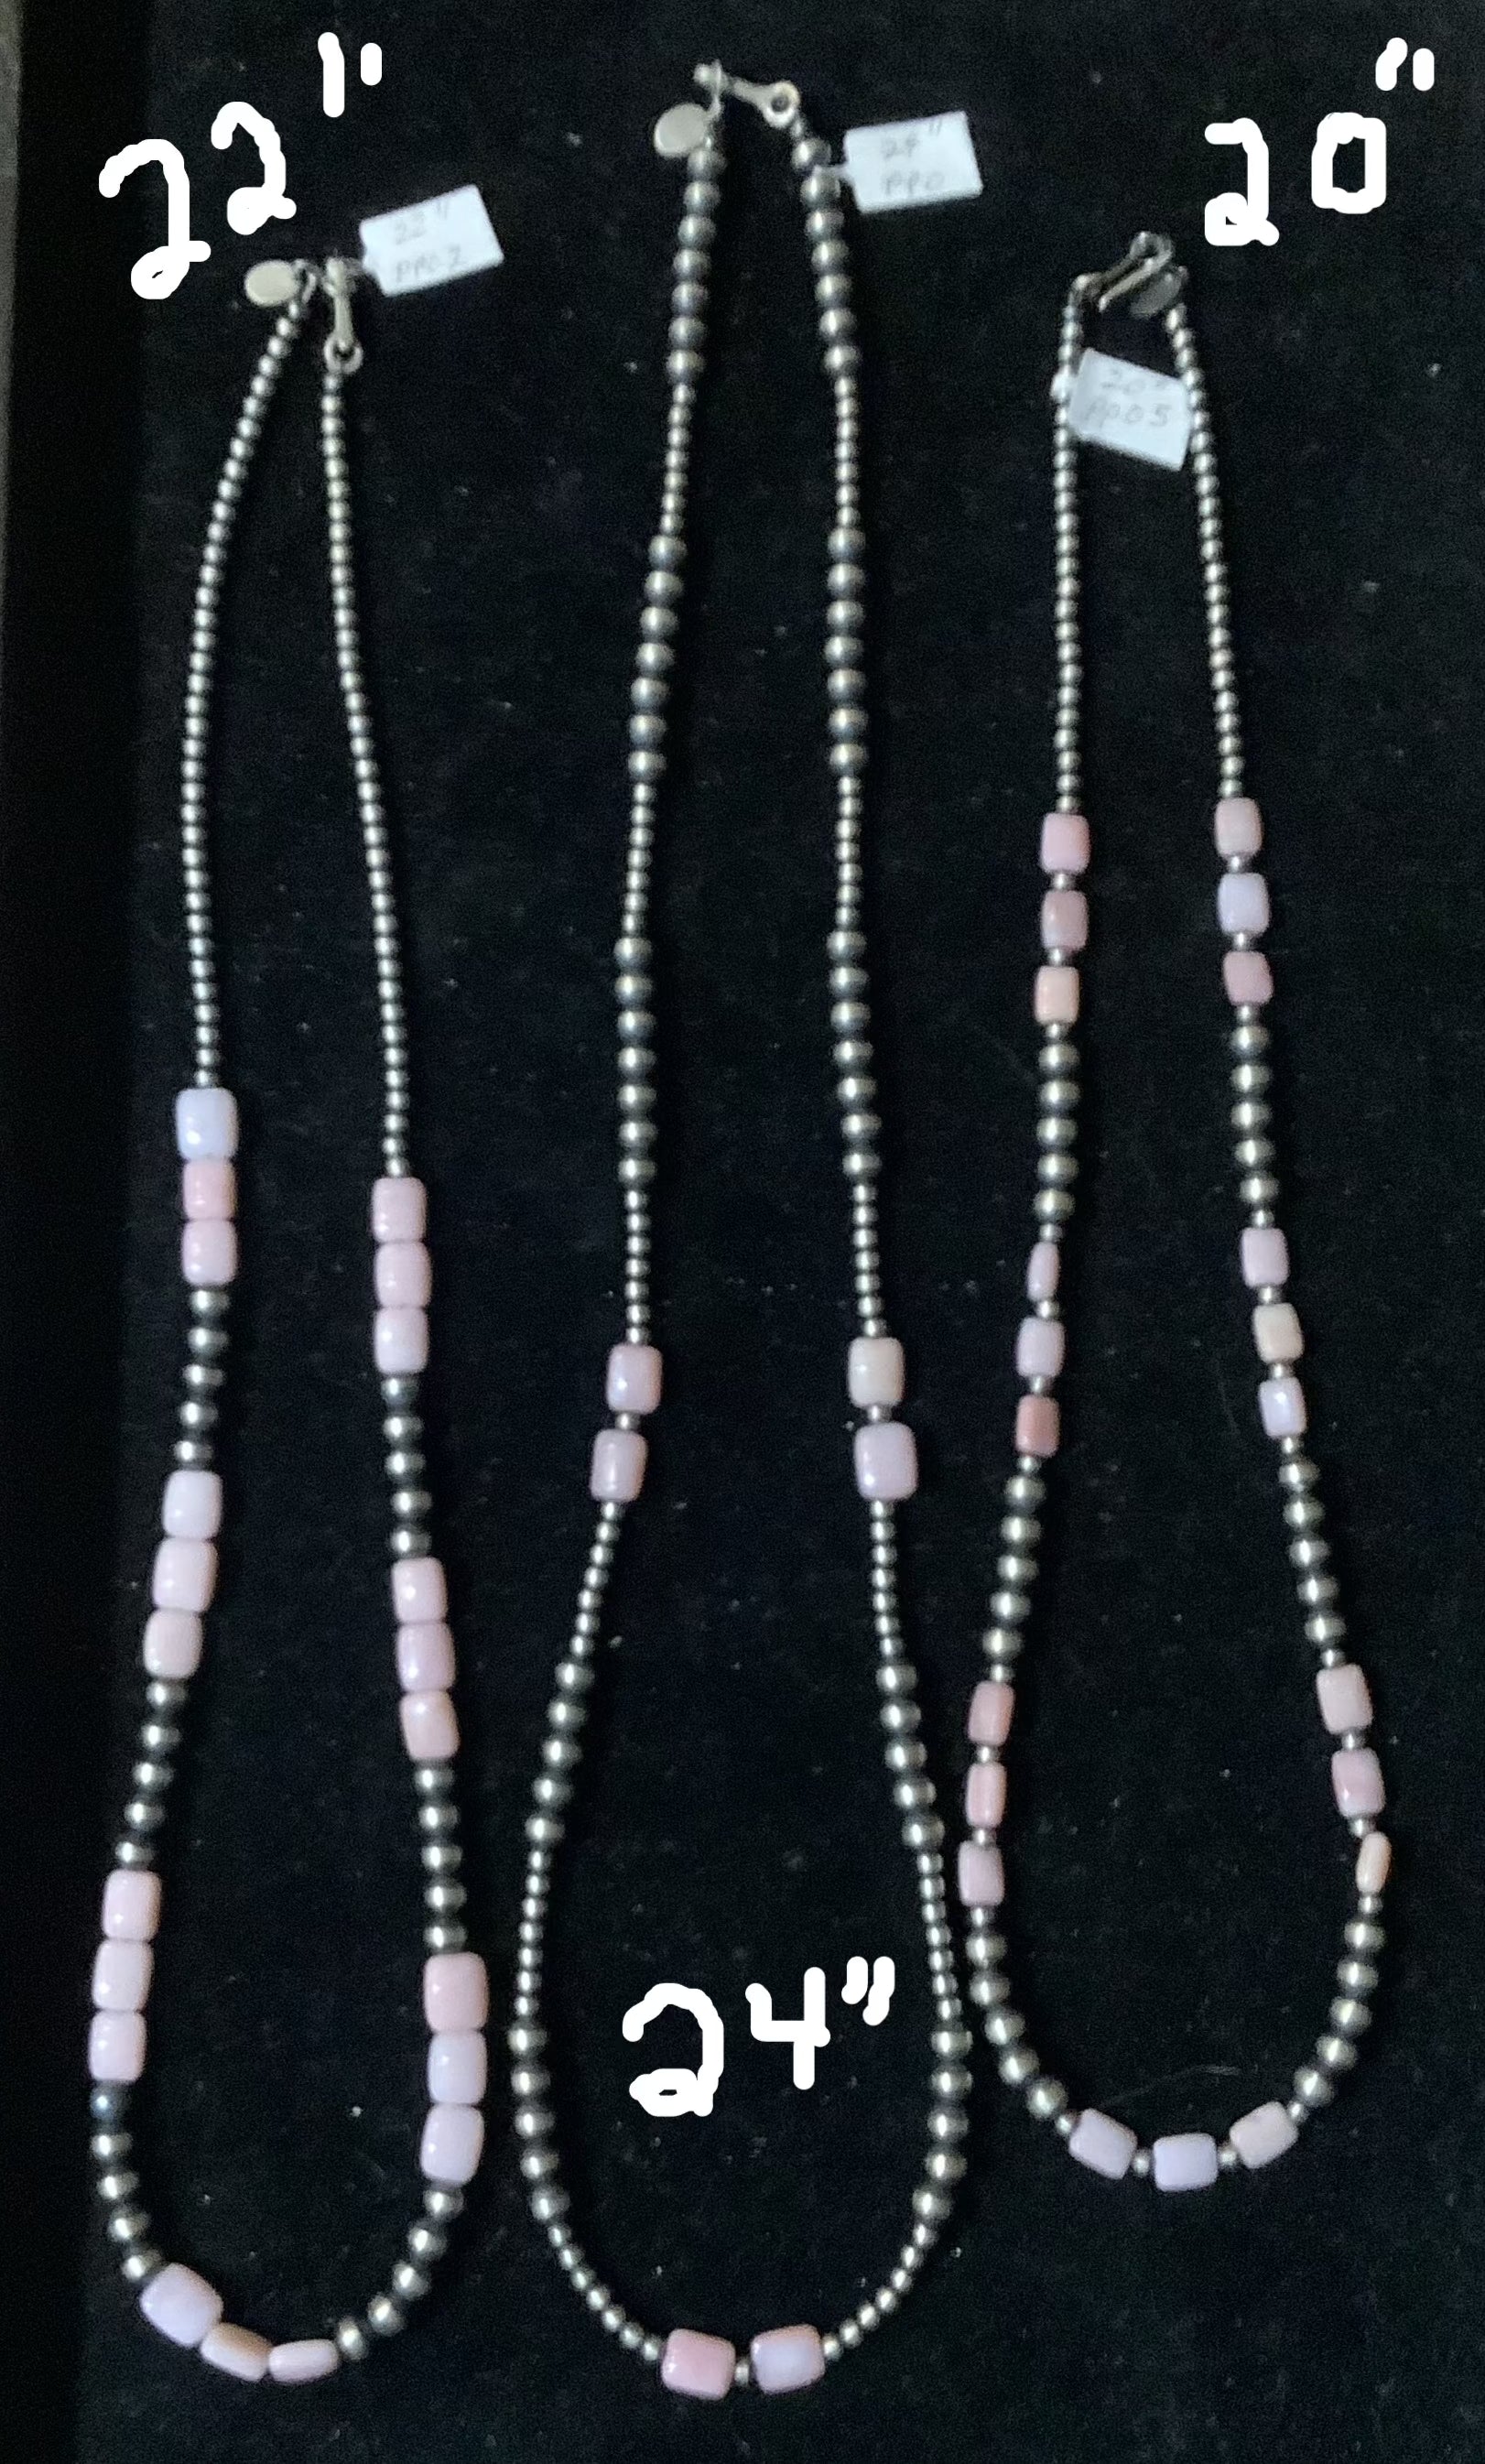 Navajo Pearl and Peruvian Opal Necklaces